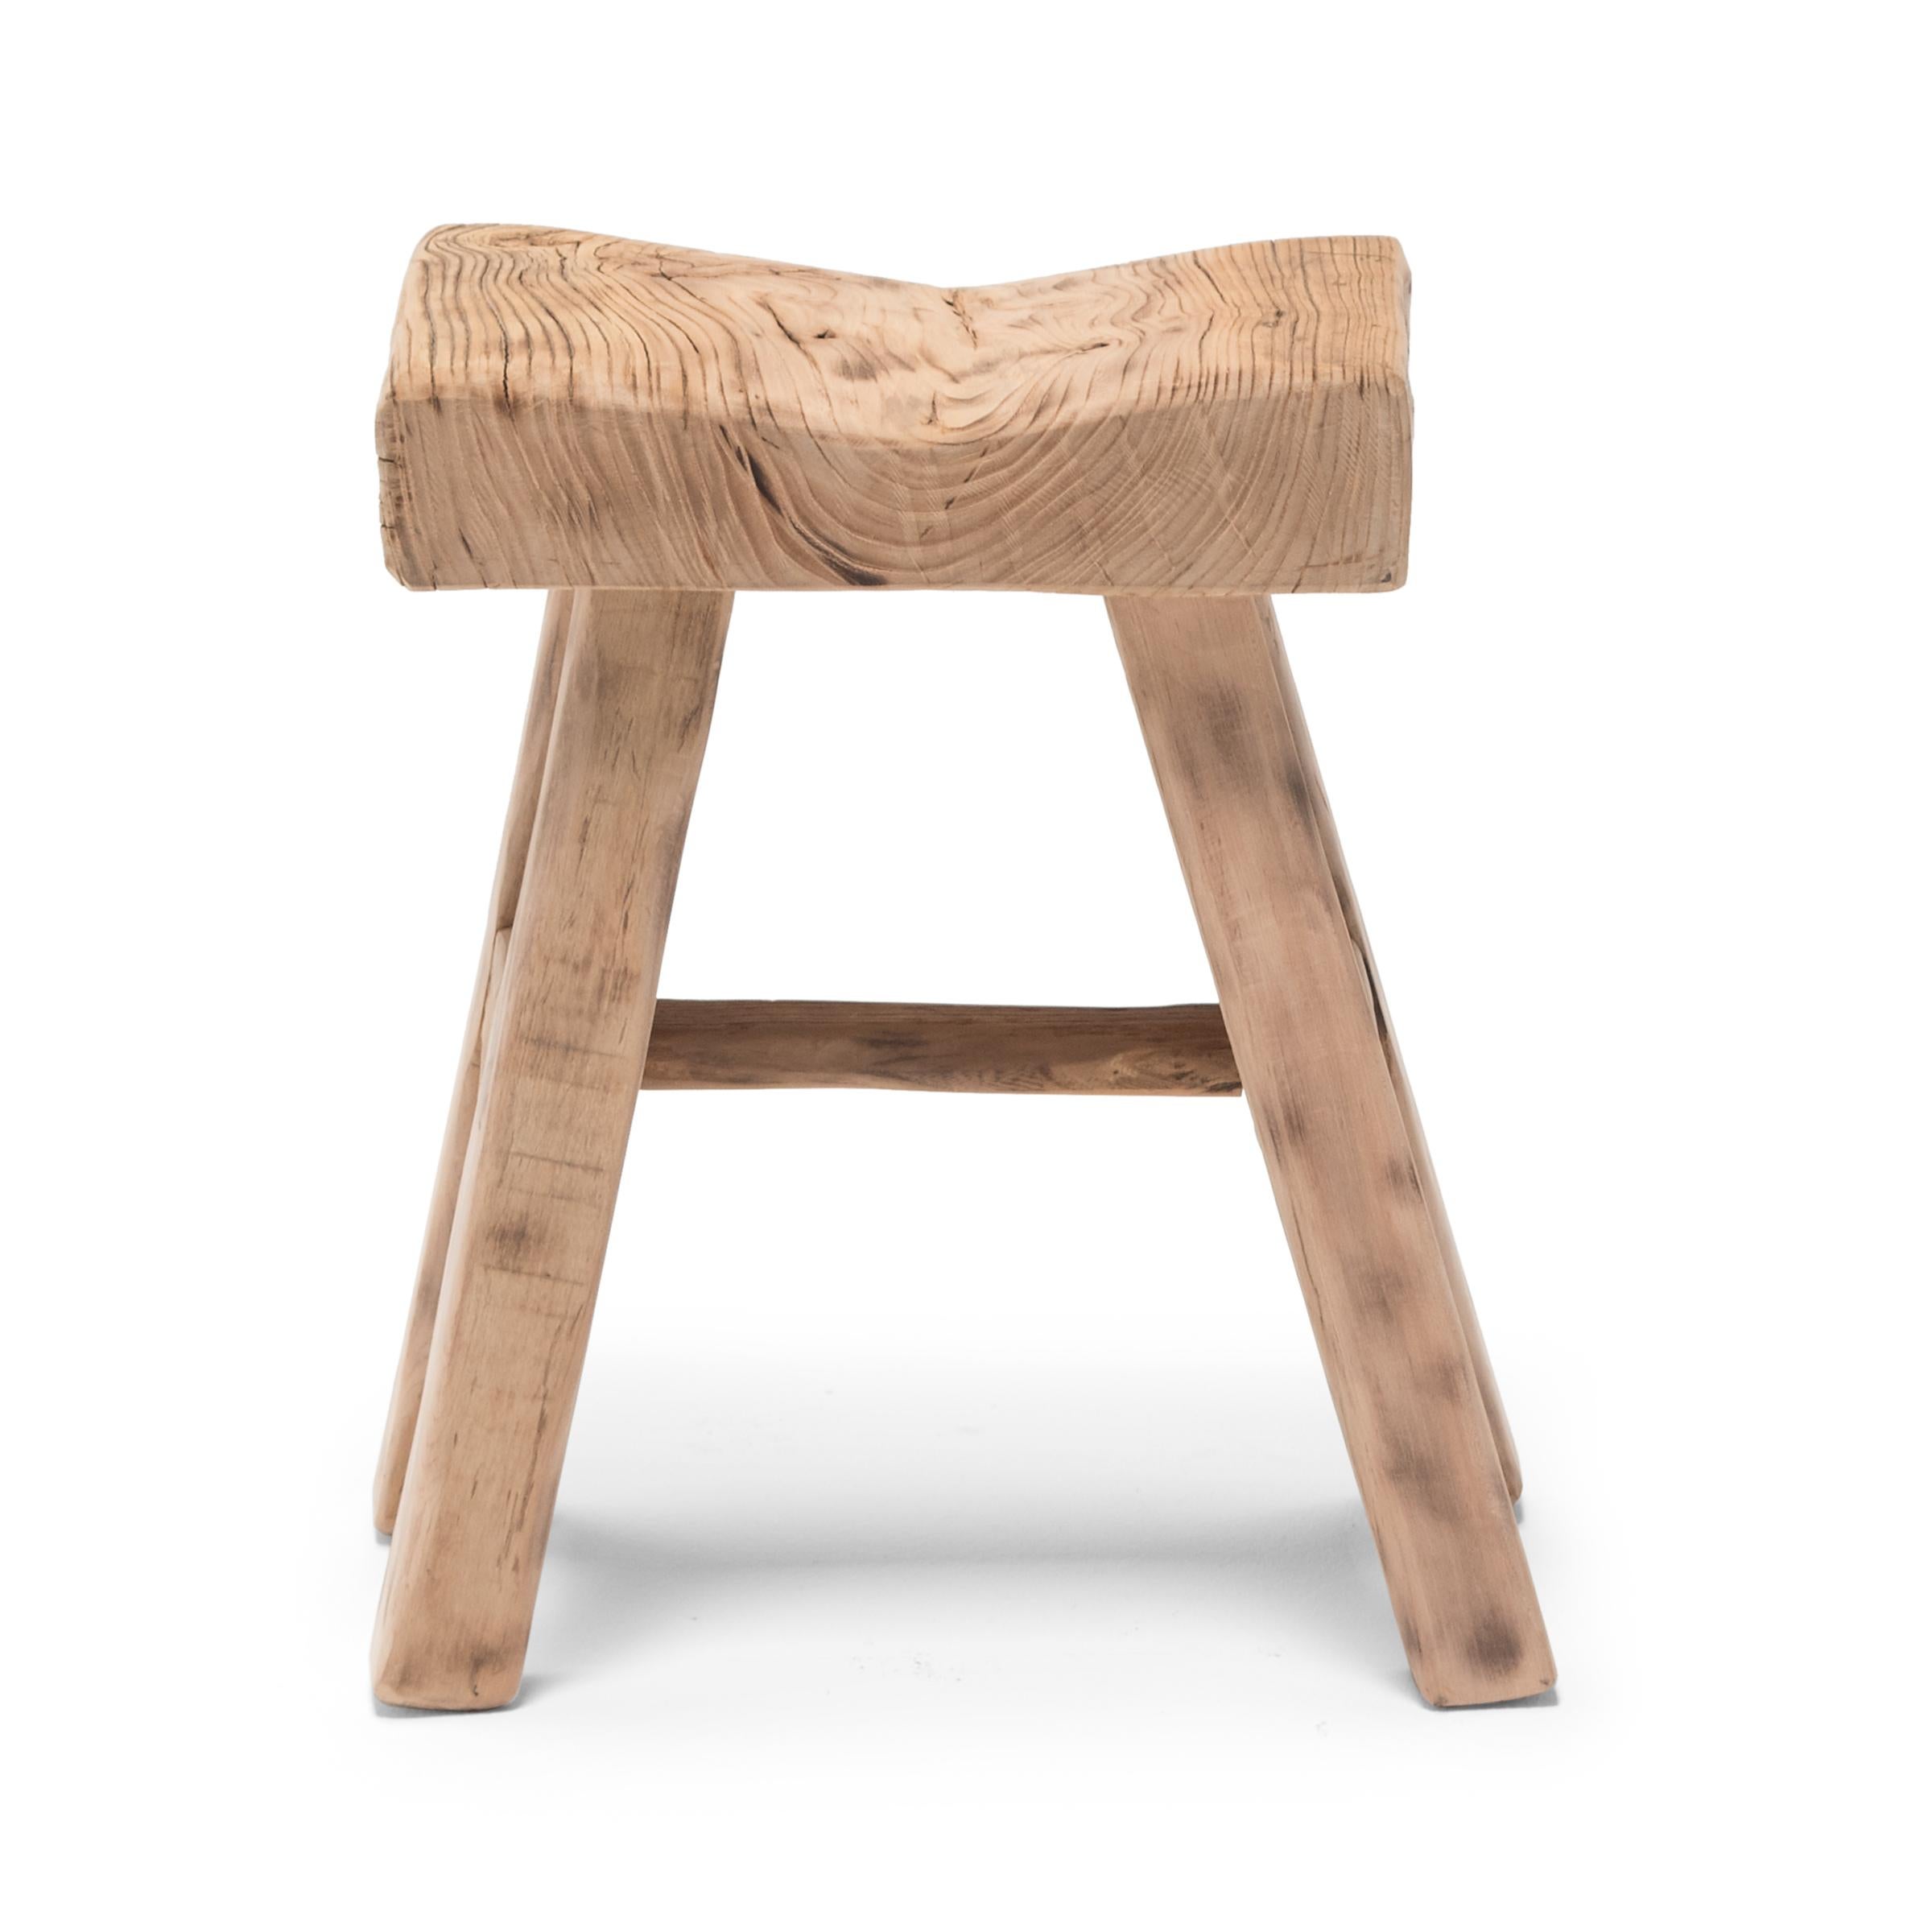 Made of wood reclaimed from 18th century Chinese buildings, this contemporary four-leg stool is the epitome of farmhouse modern. Skilled in traditional joinery techniques, our craftspeople fashioned a simple, portable stool, much like those that